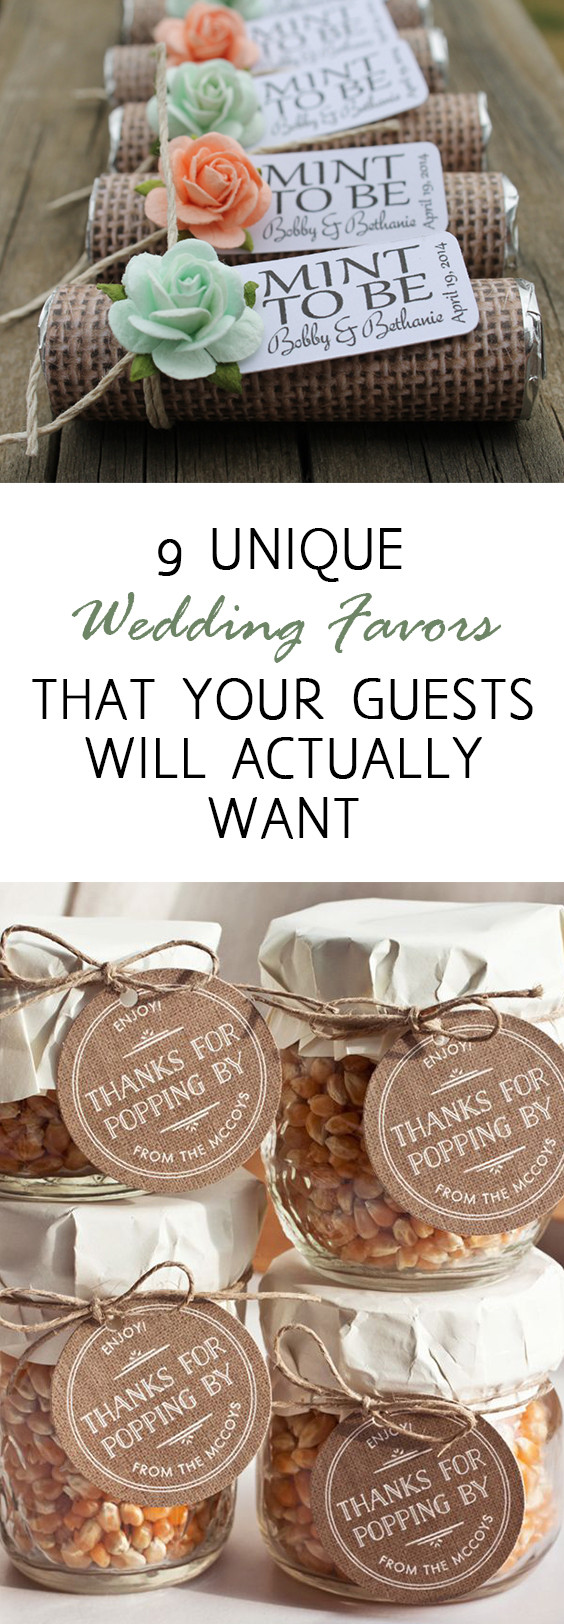 Creative Wedding Favors
 9 Unique Wedding Favors that Your Guests Will Actually